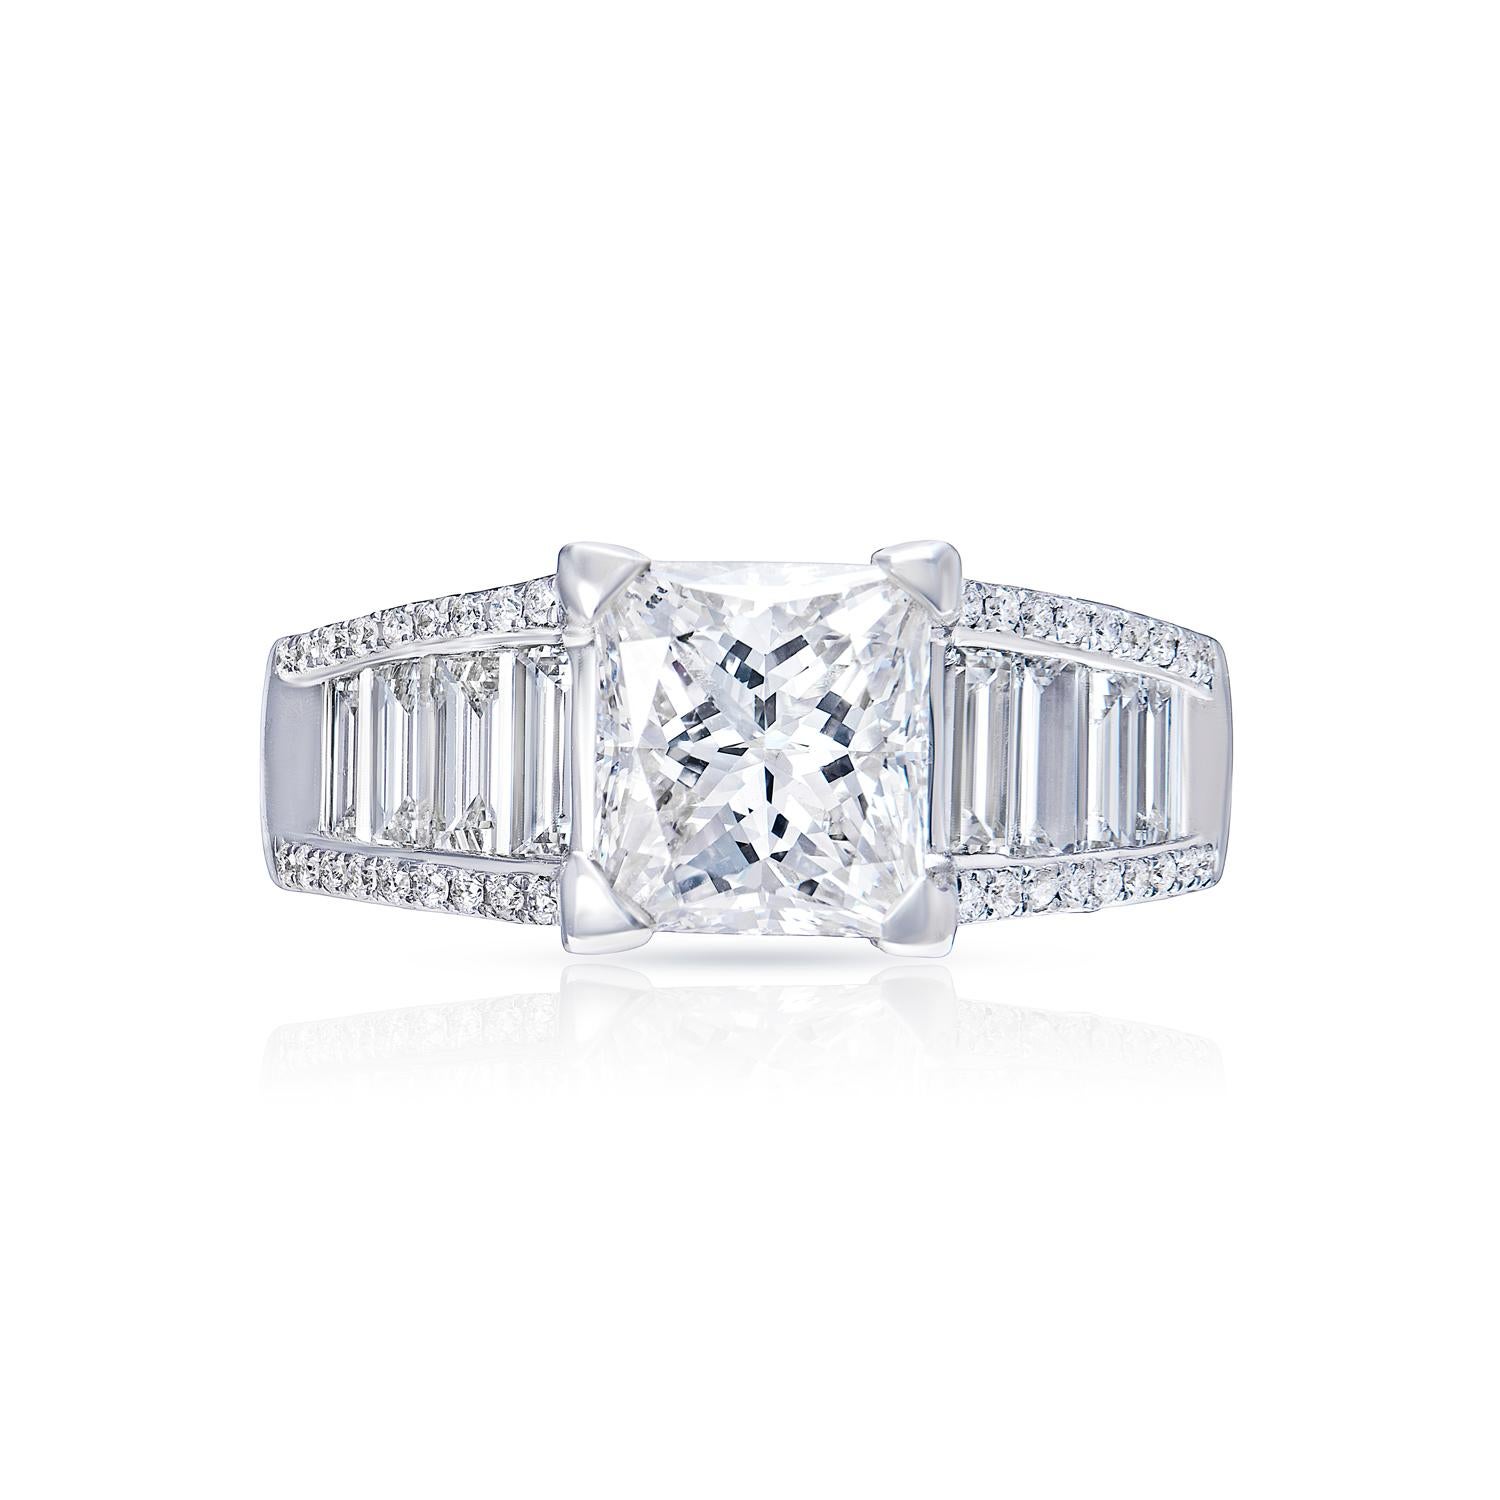 Center Earth Mined Diamond:
Carat Weight: 2.06 Carats
Color: G
Clarity: VS2*
Style: Princess Cut

*Feather Filled. Grades based on appearance after clarity enhancement 

EGL international certificate

Ring:
Total Carats:3.21 Carats
Metal: 18 karat